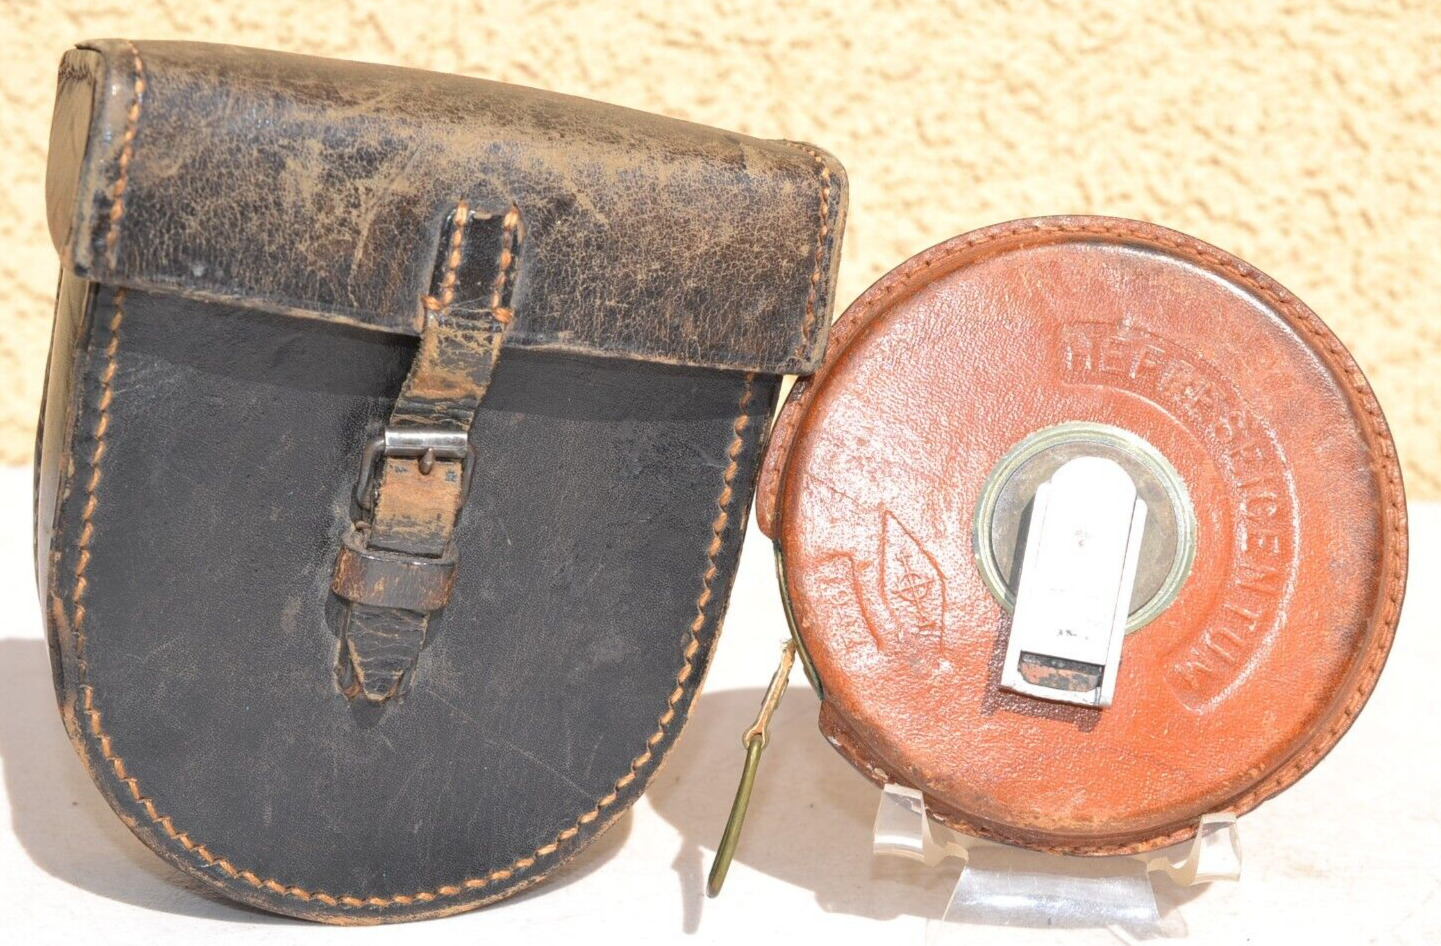 RARE GERMANY WW 2 1942 PIONEERS FIELD TAPE MEASURE WITH 1937 LEATHER BELT CASE